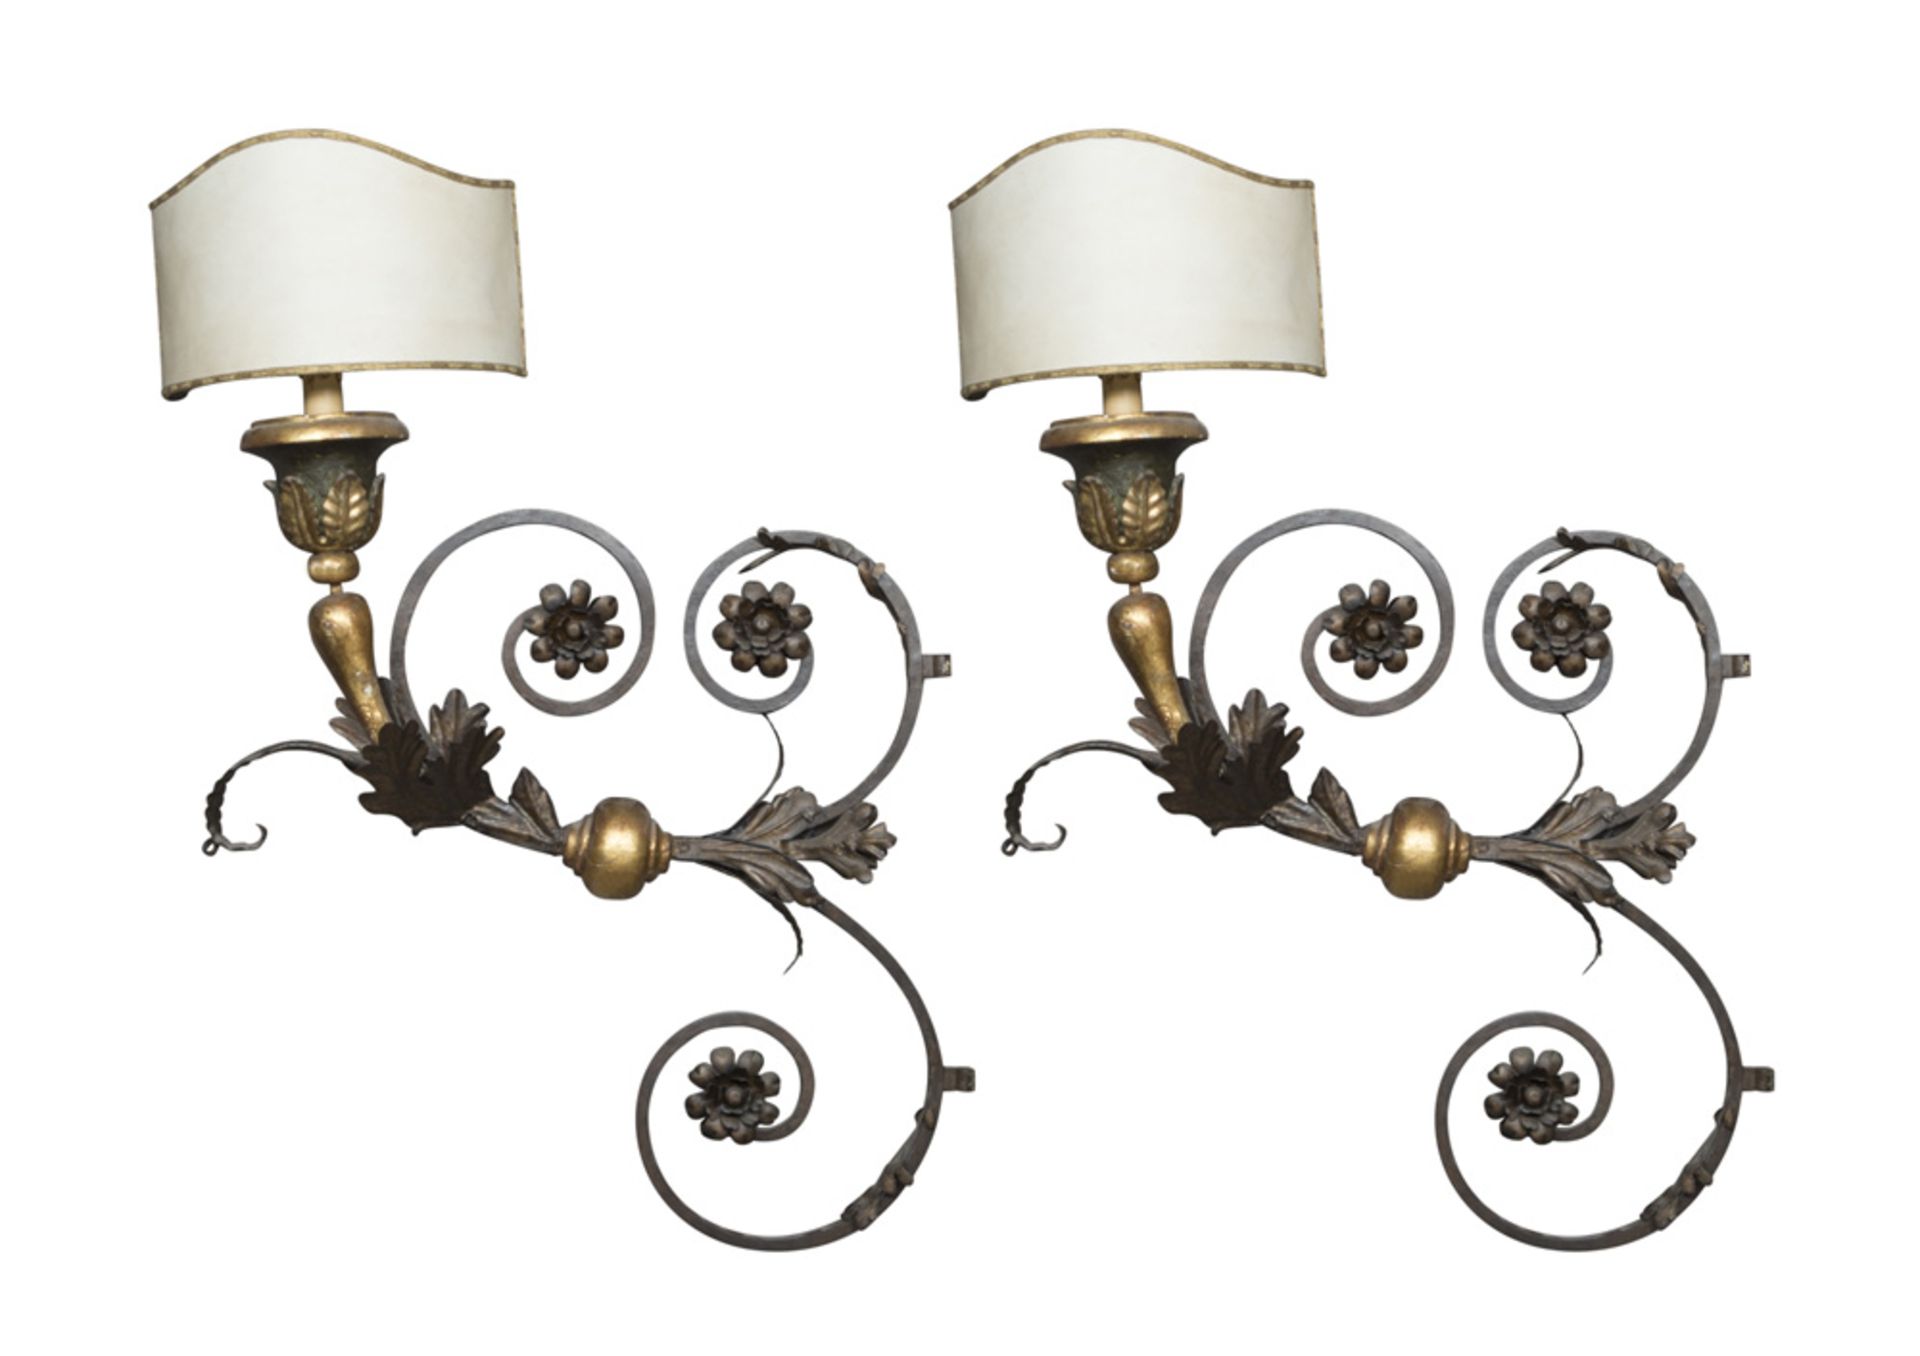 PAIR OF LARGE WALL ARMS IN WROUGHT IRON, LATE 19TH CENTURY of seventeenth-century taste, with